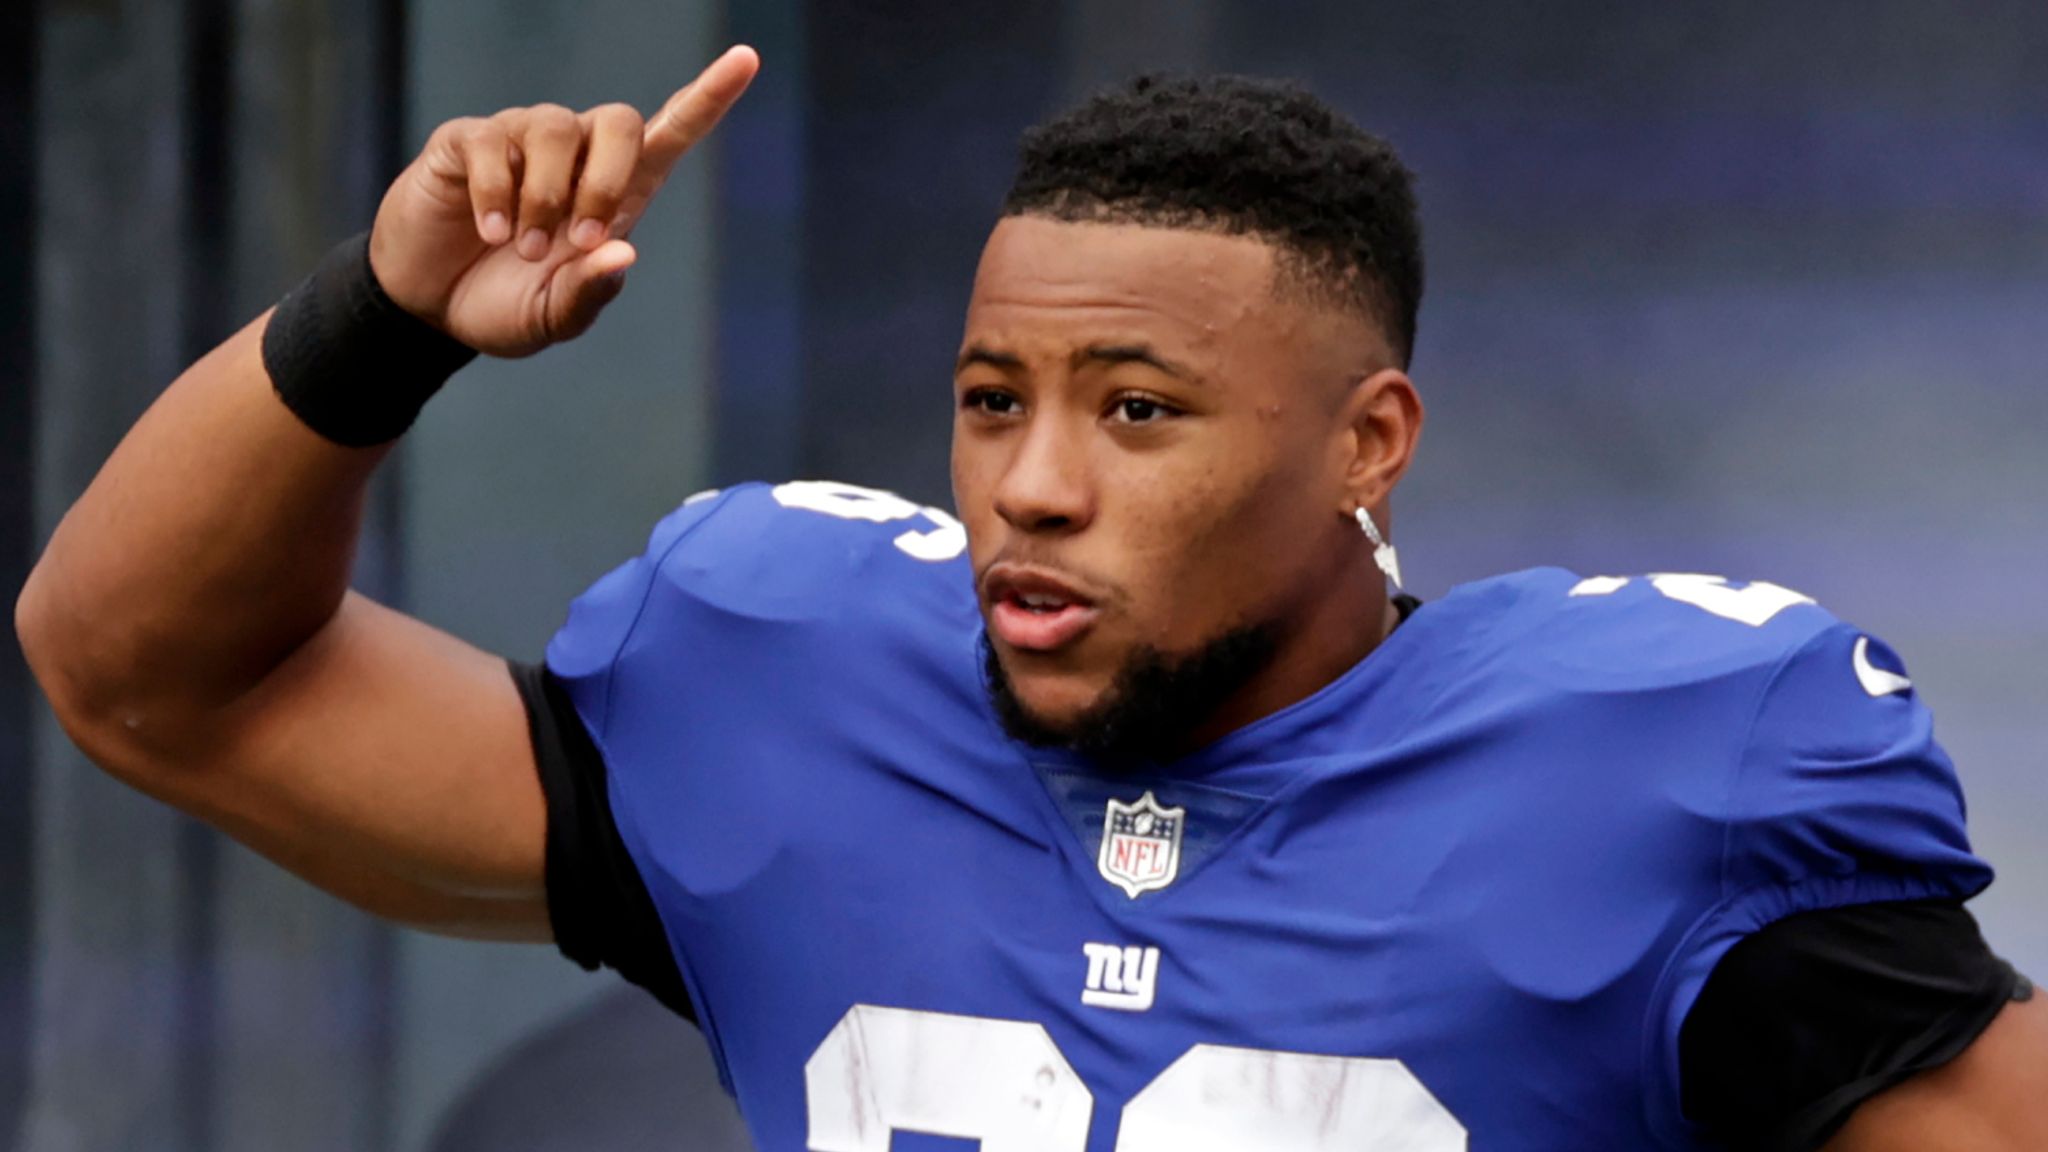 Lions know Giants will try to wear them down with star RB Saquon Barkley 